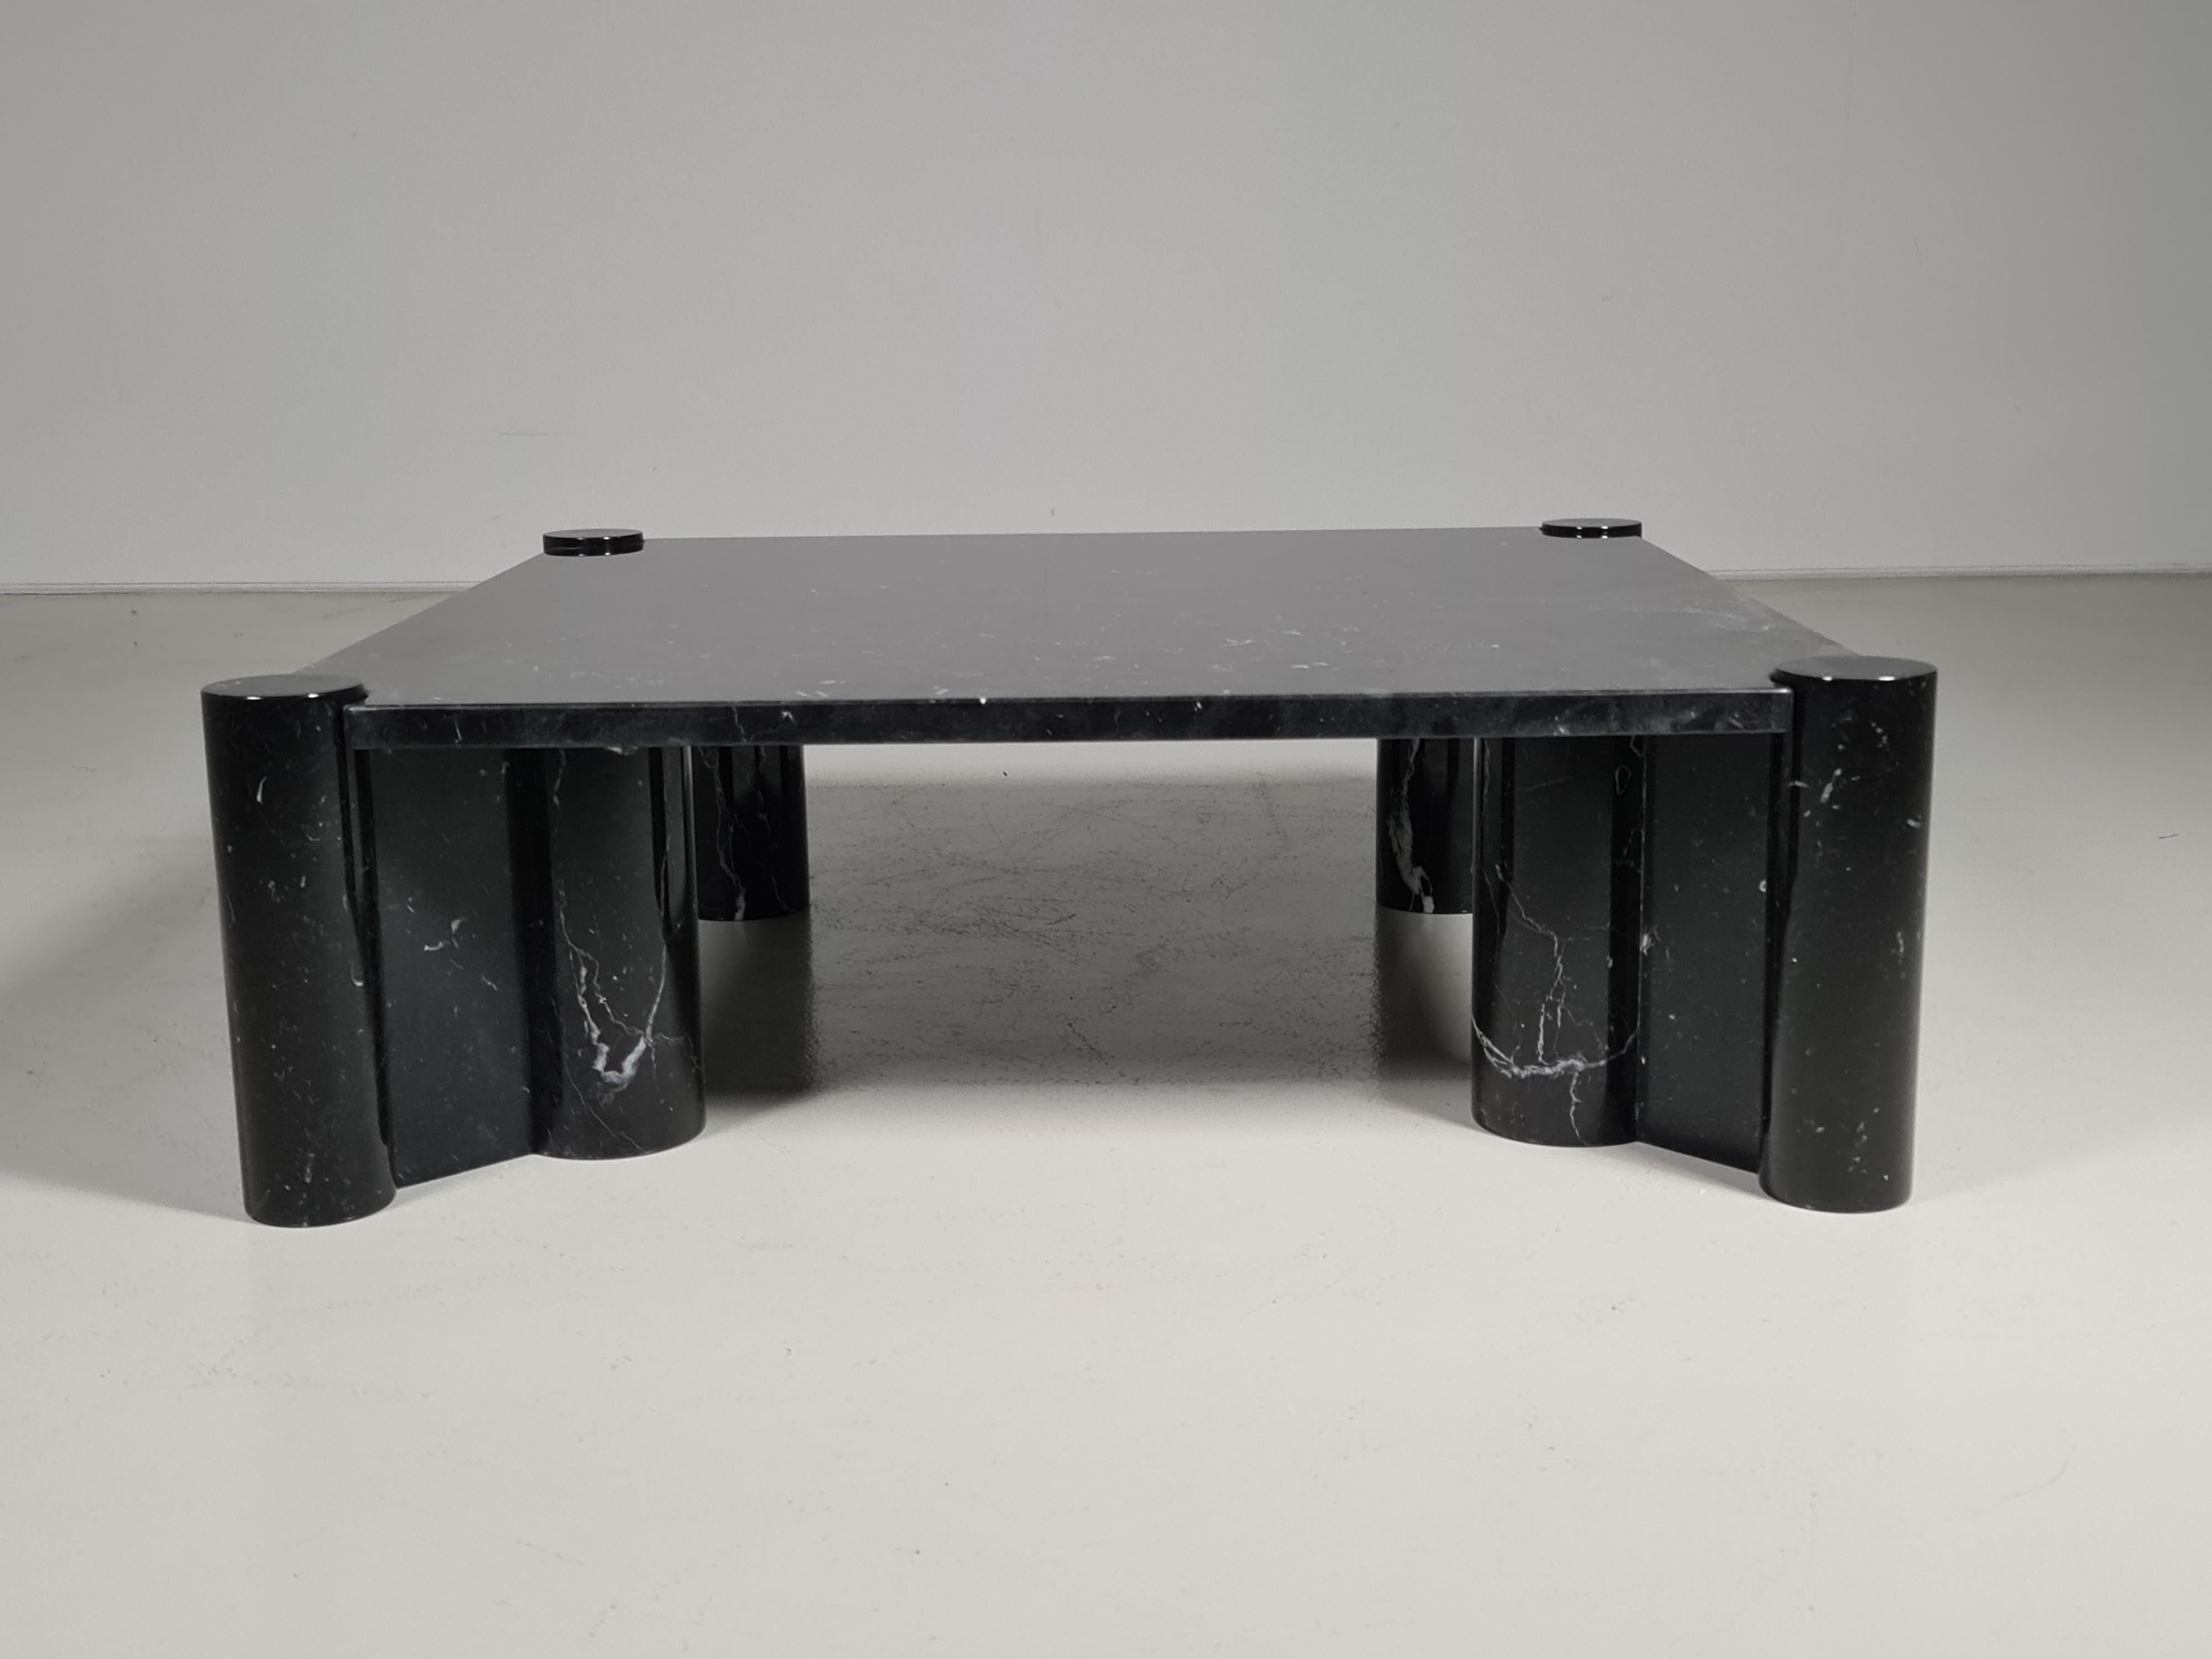 Jumbo coffee table in black marquina marble, designed by Gae Aulenti for Knoll International in the 1960s. Square table top with four cylindrical cluster legs. Some small signs of use. No damages.

This table would look amazing in any modern home